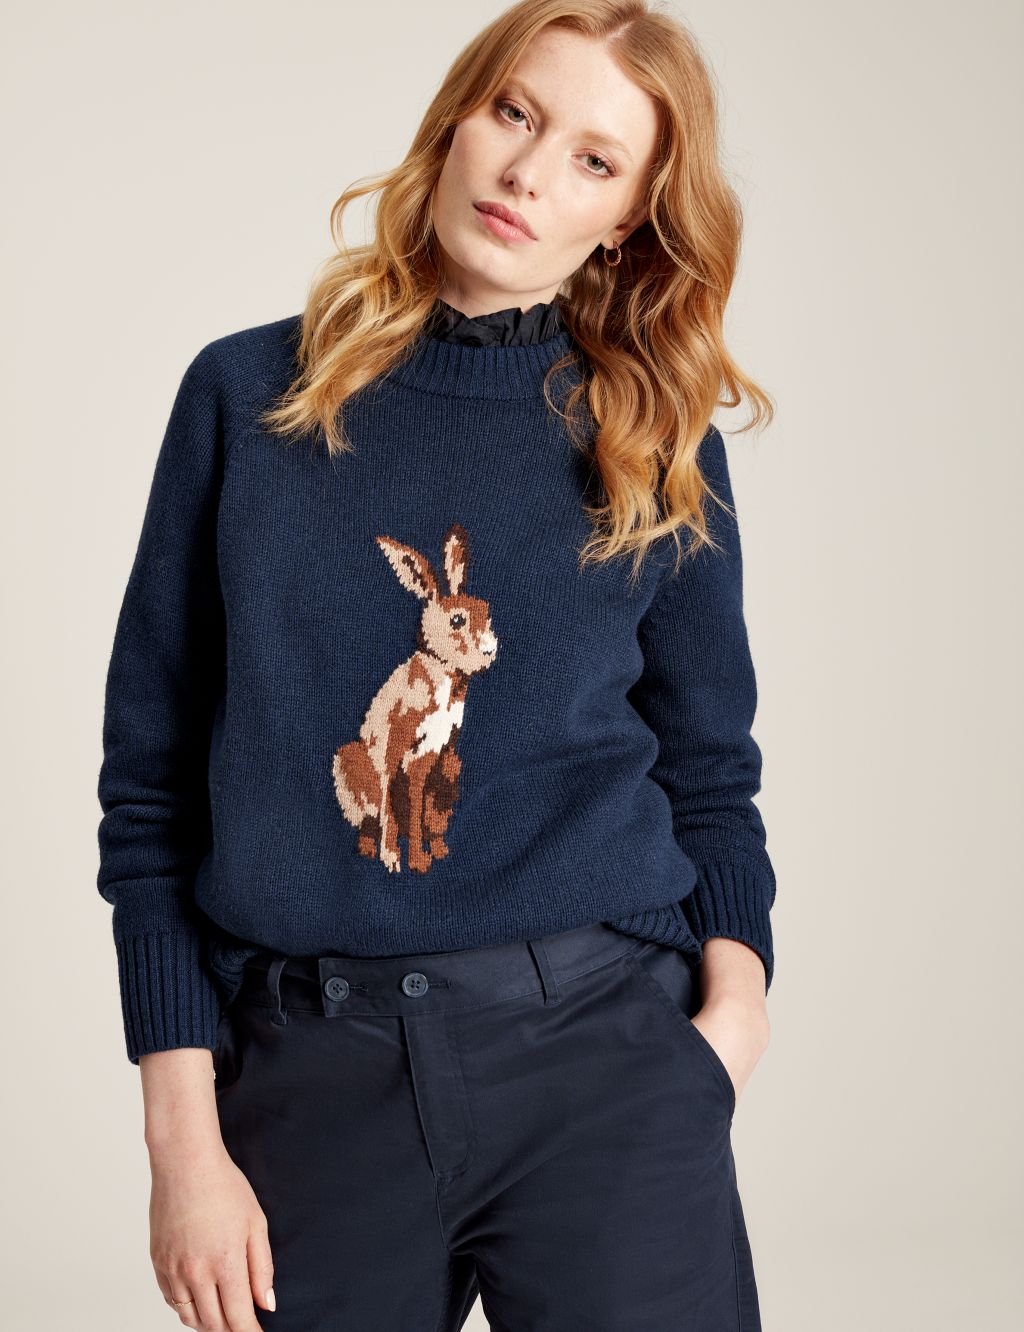 Cotton Rich Patterned Jumper with Wool image 1